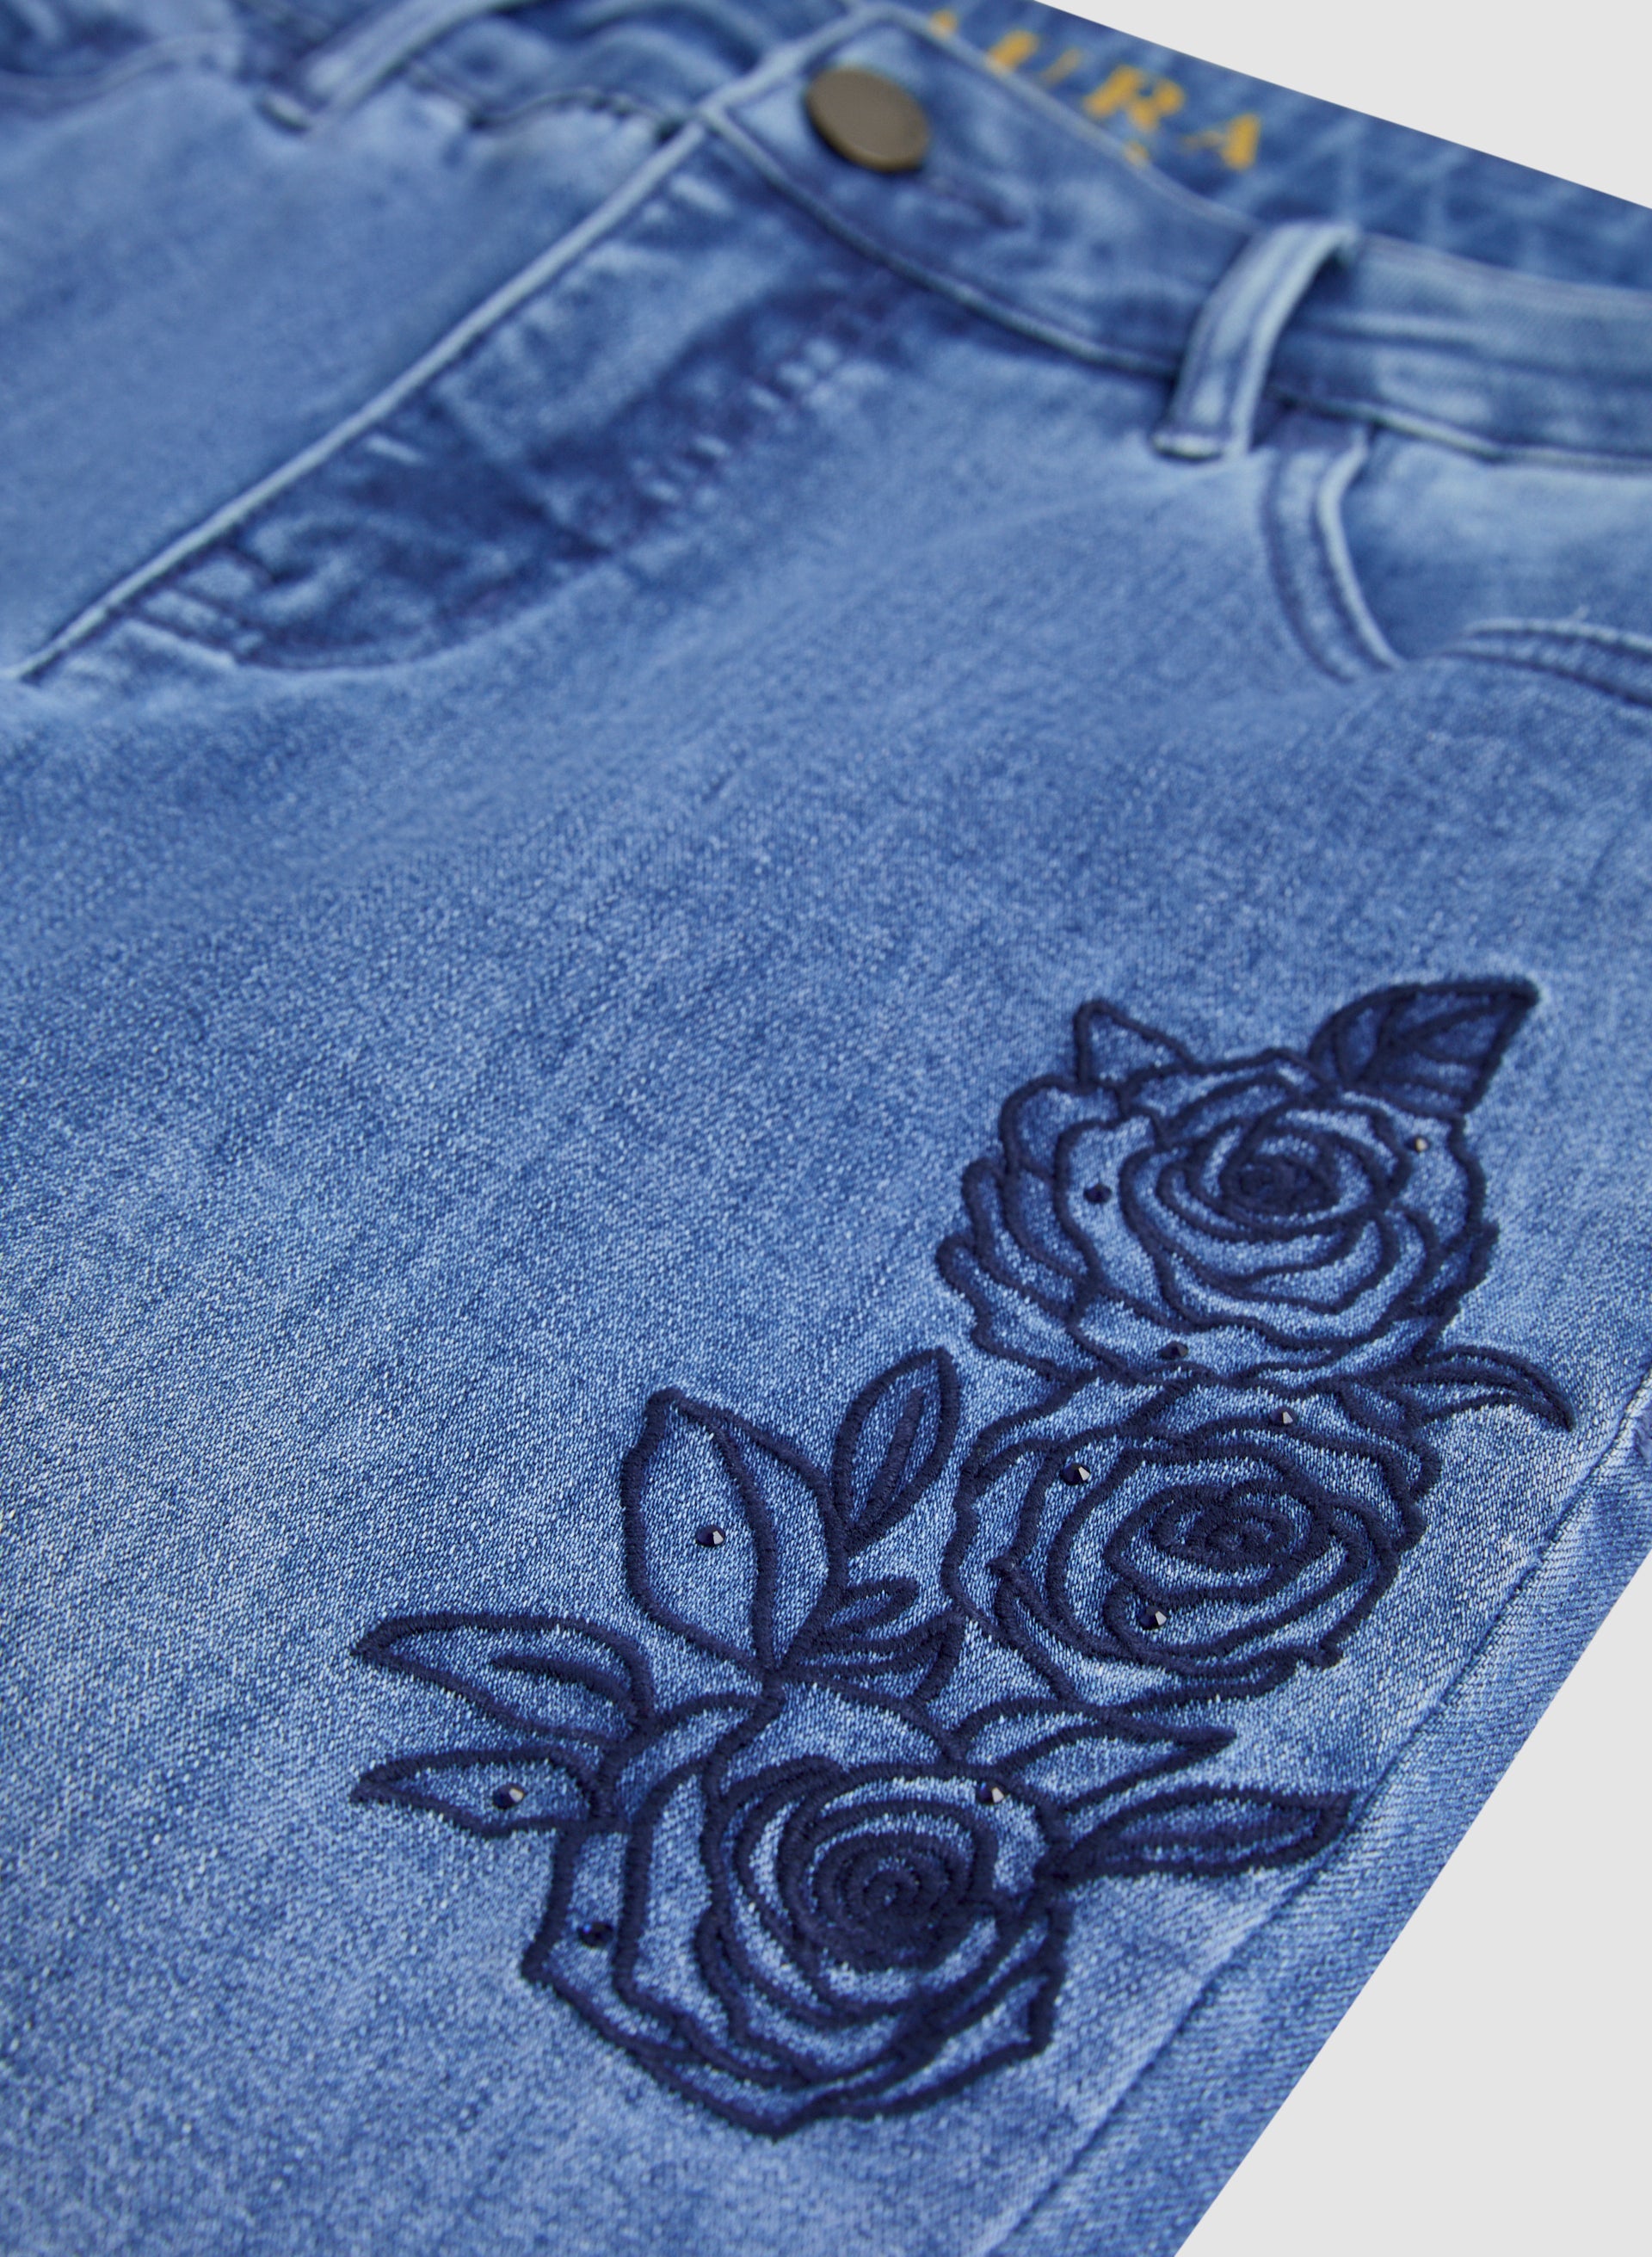 Floral Embroidered Mom Jeans - Jeans - Clothing